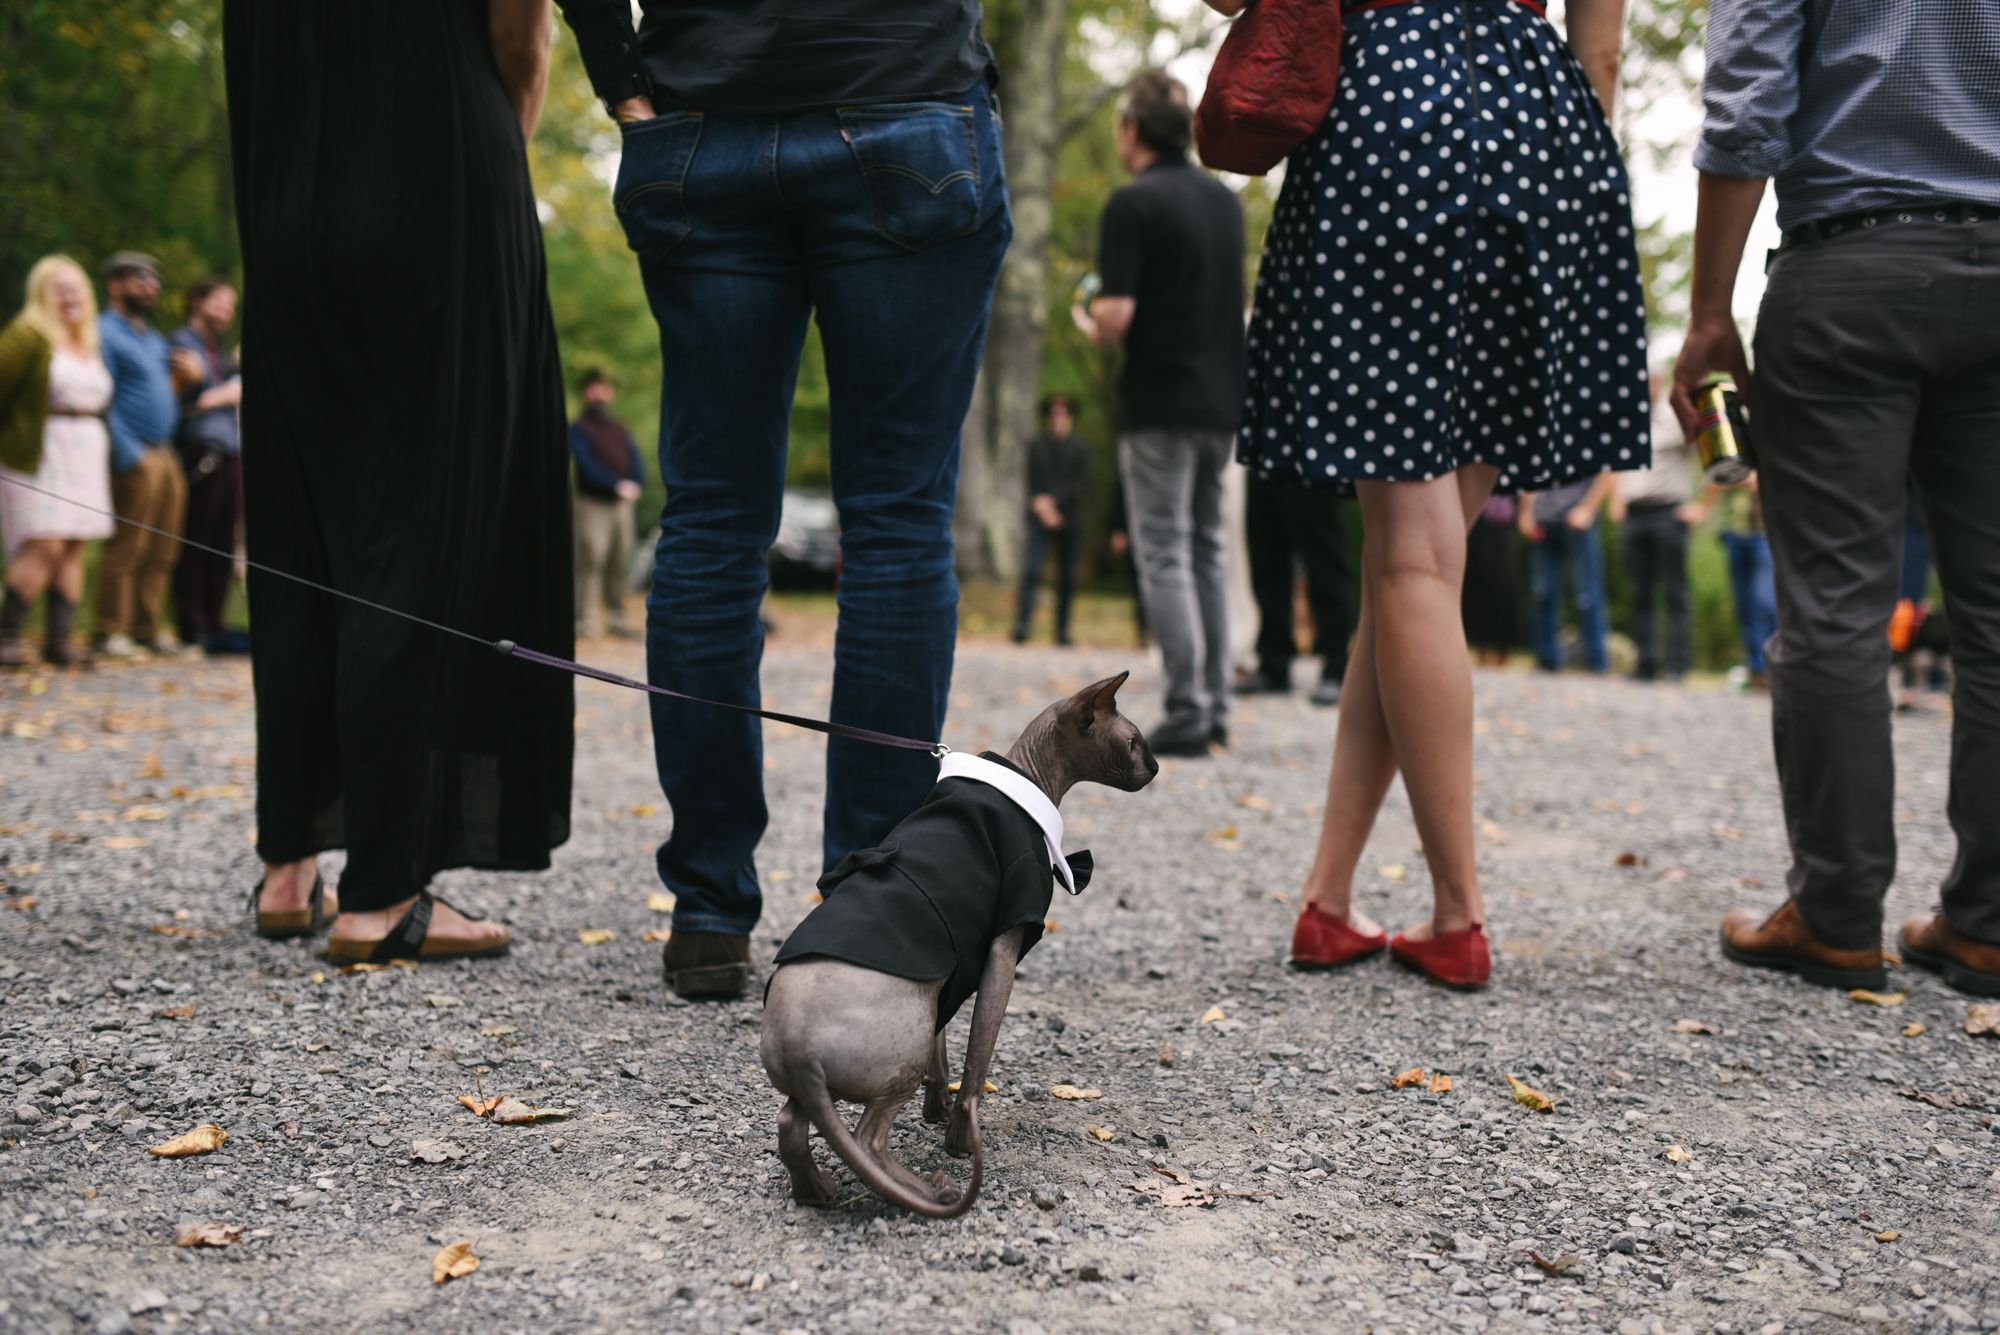  Mountain Wedding, Outdoors, Rustic, West Virginia, Maryland Wedding Photographer, DIY, Casual, pets, cat in tuxedo on a leash, hairless cat 